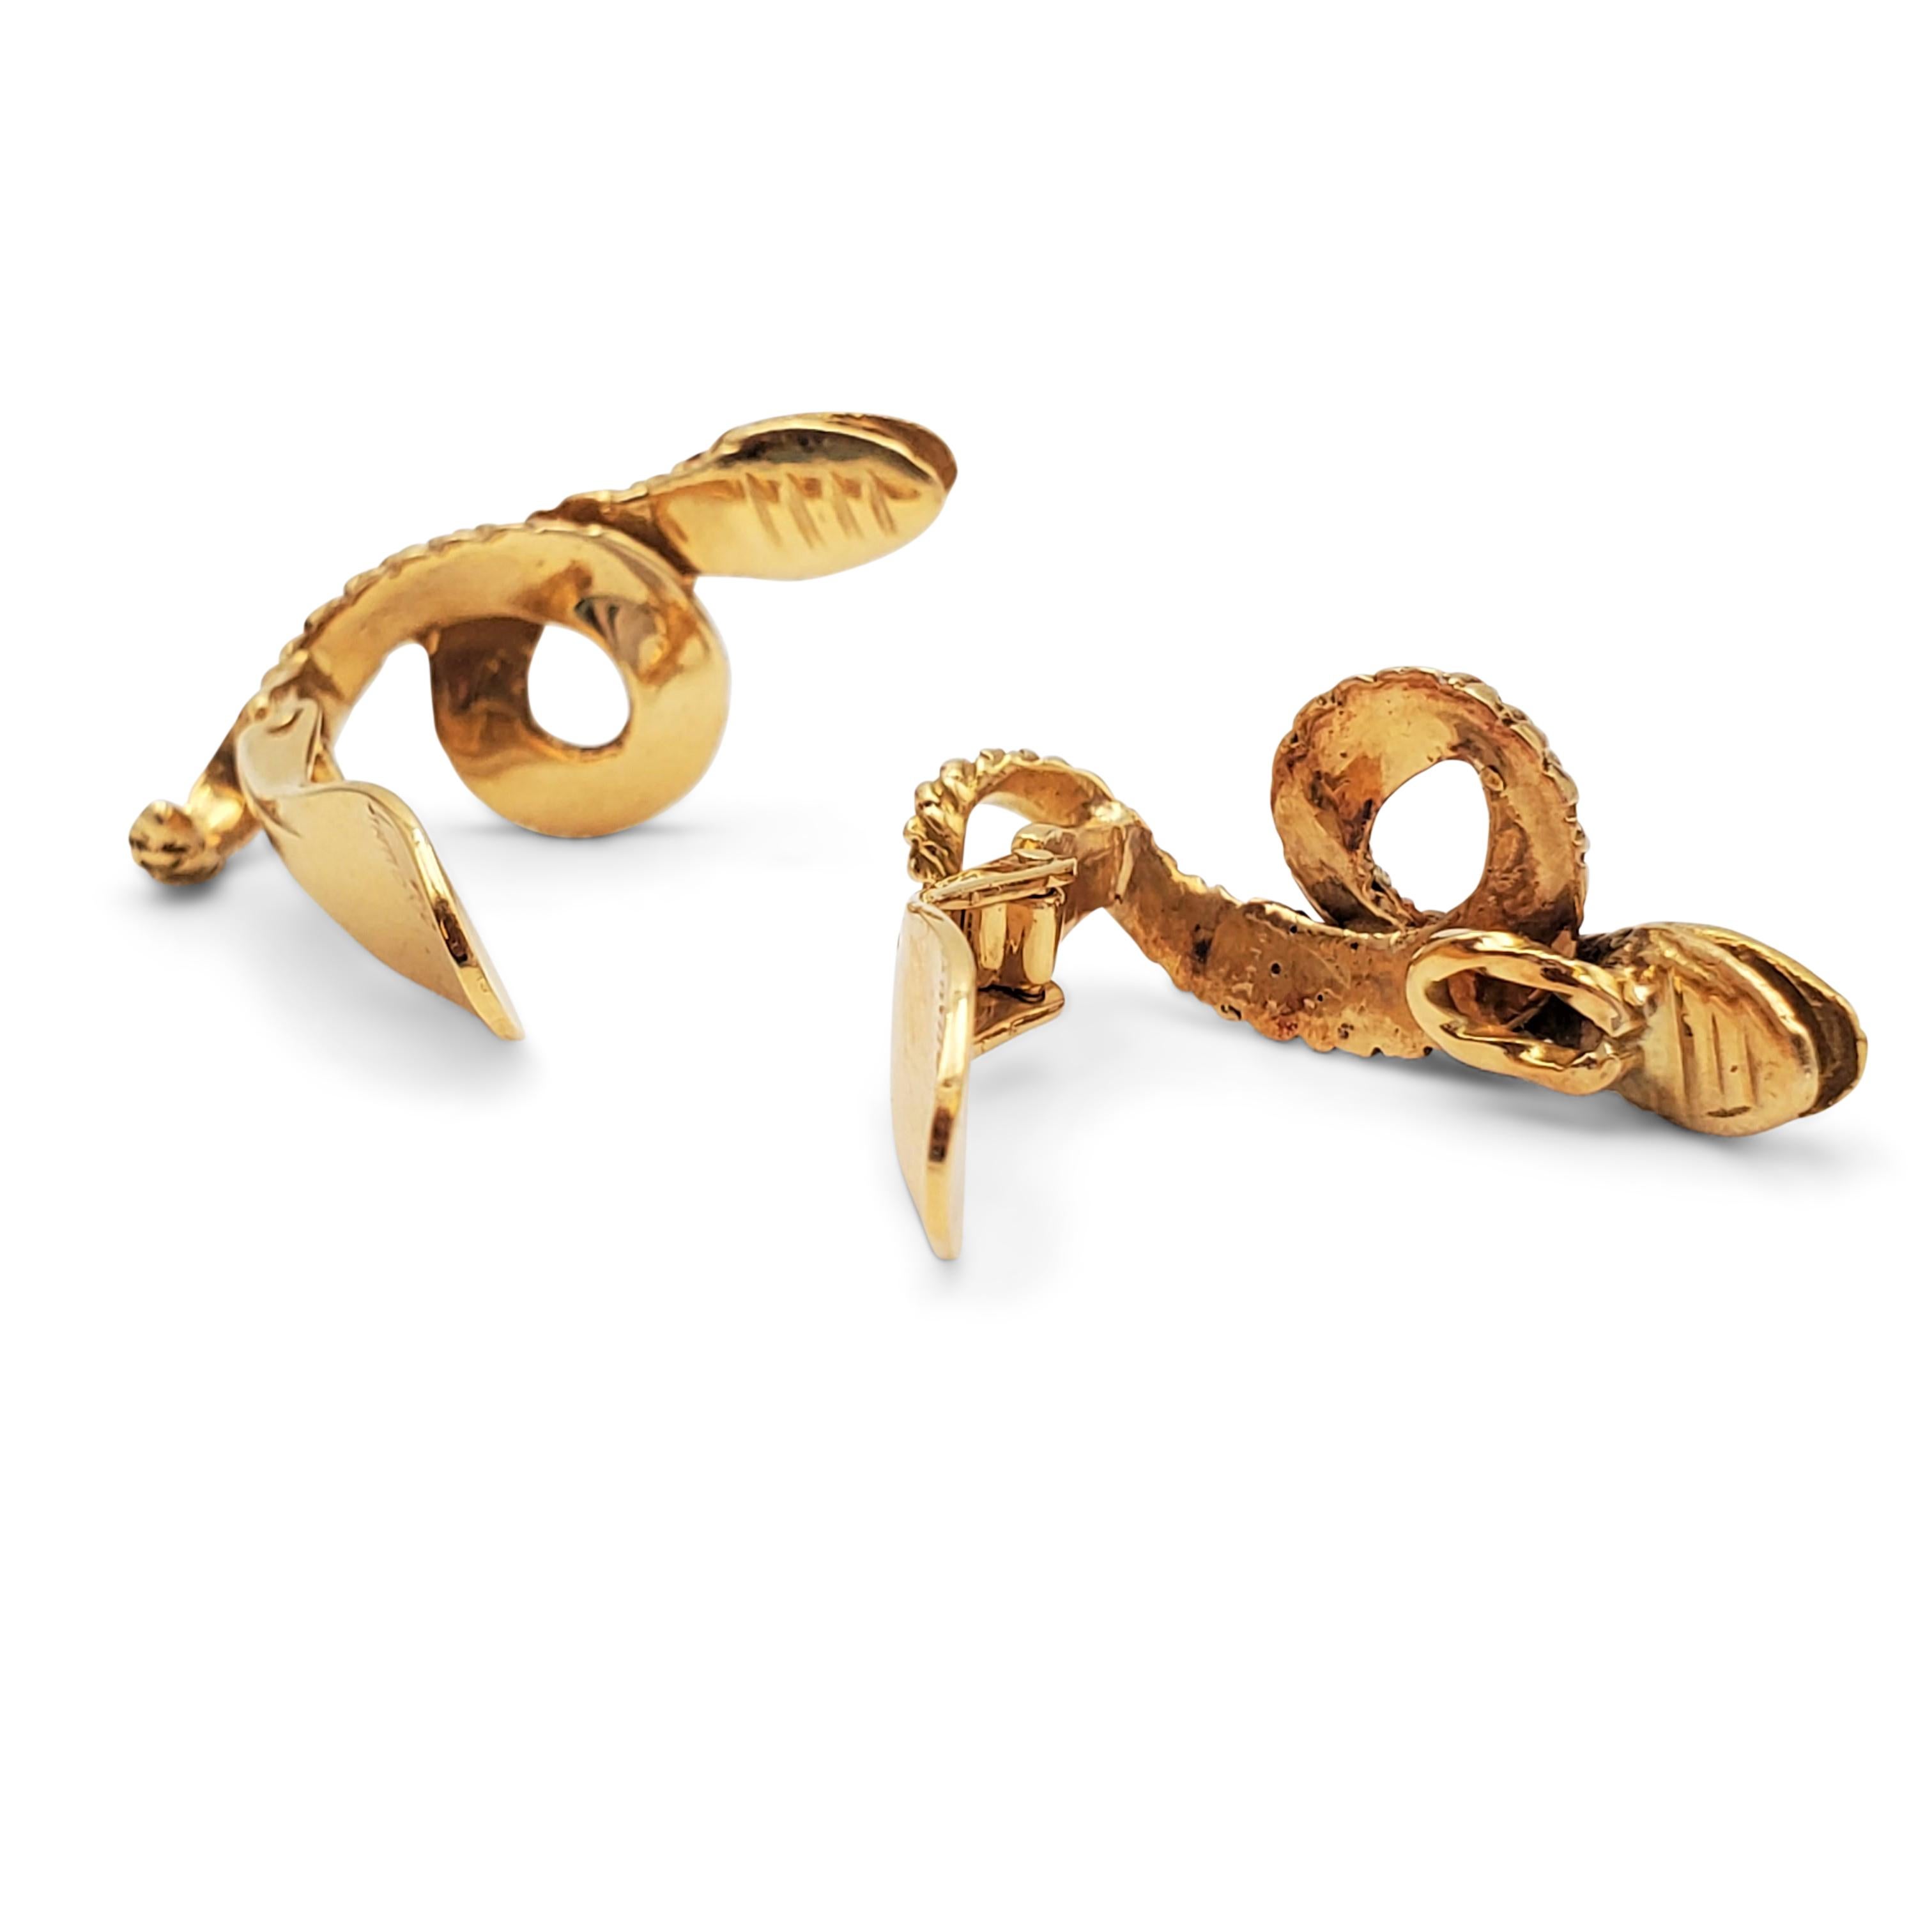 Authentic Lalaounis earclips crafted in 18 karat yellow gold,  Designed as coiling snakes, the earrings measure 1 inch in length and 1/2 inch at the widest point.  Signed Lalaounis, K18, Greece. Not presented with original box or papers. CIRCA 1980s